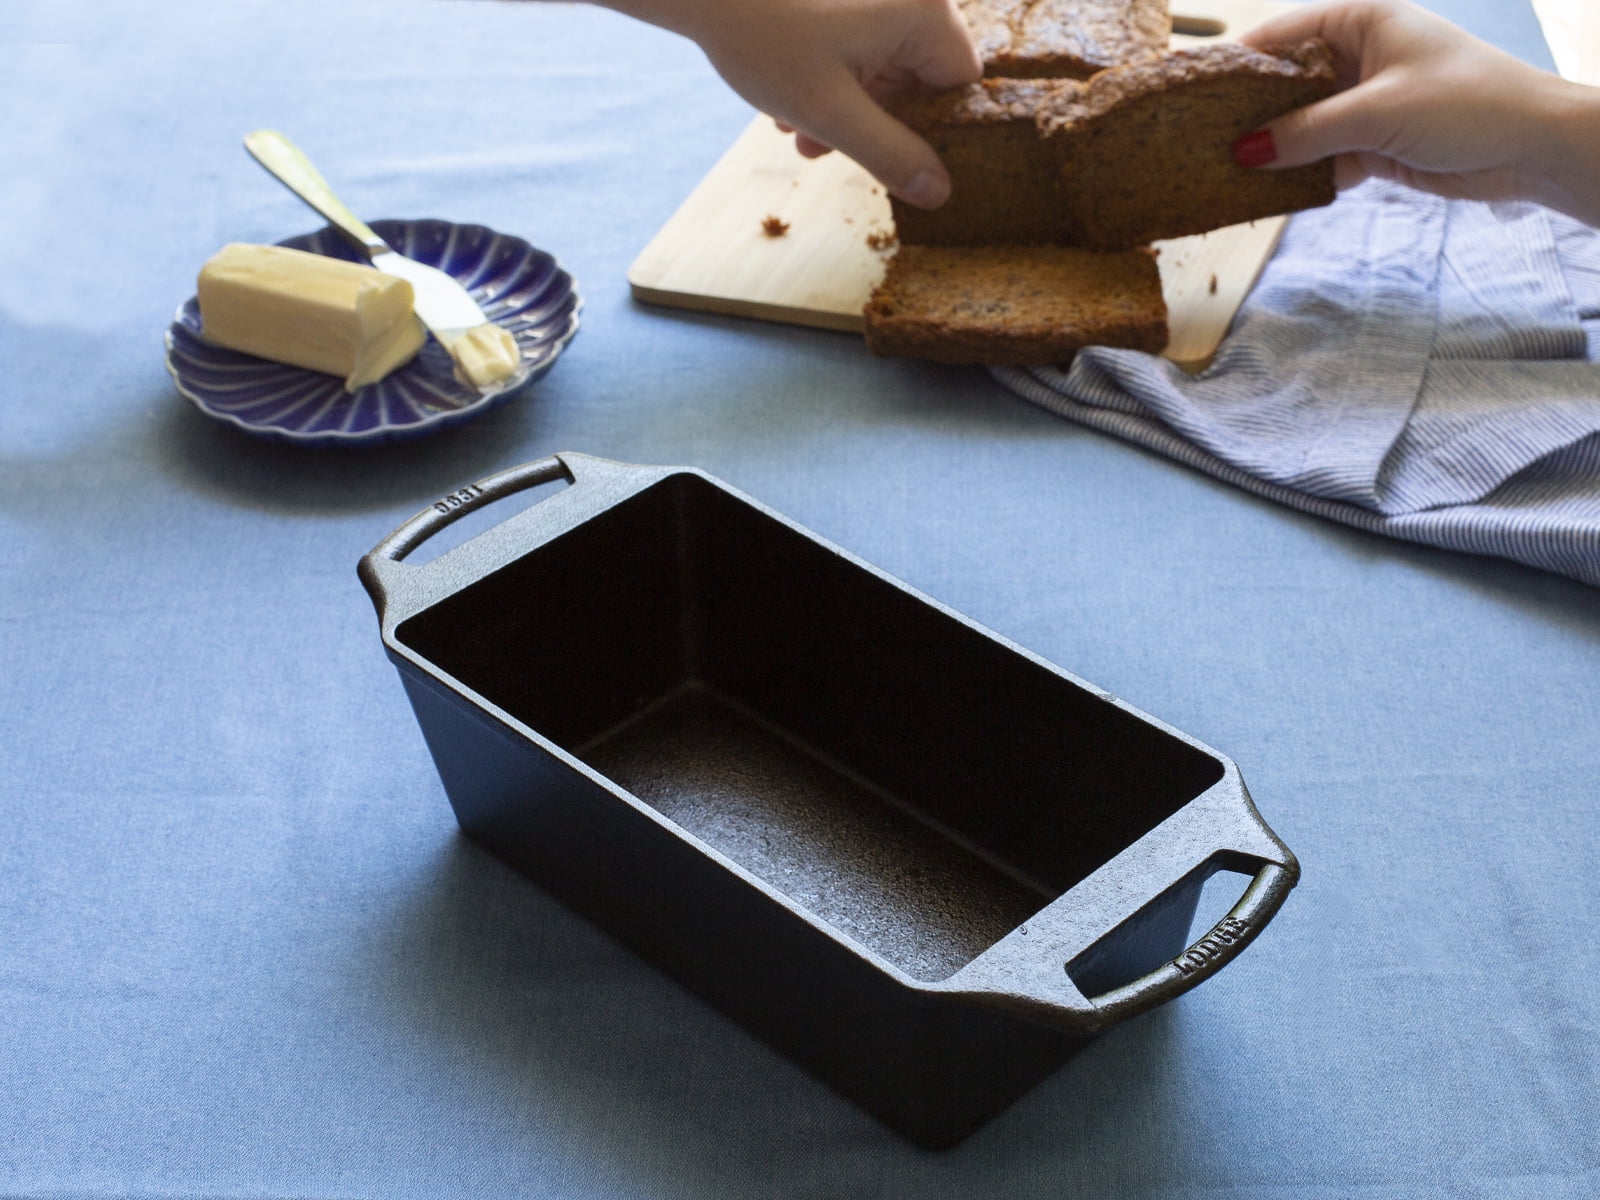 Lodge Cast Iron Loaf Pan with Silicone Grip